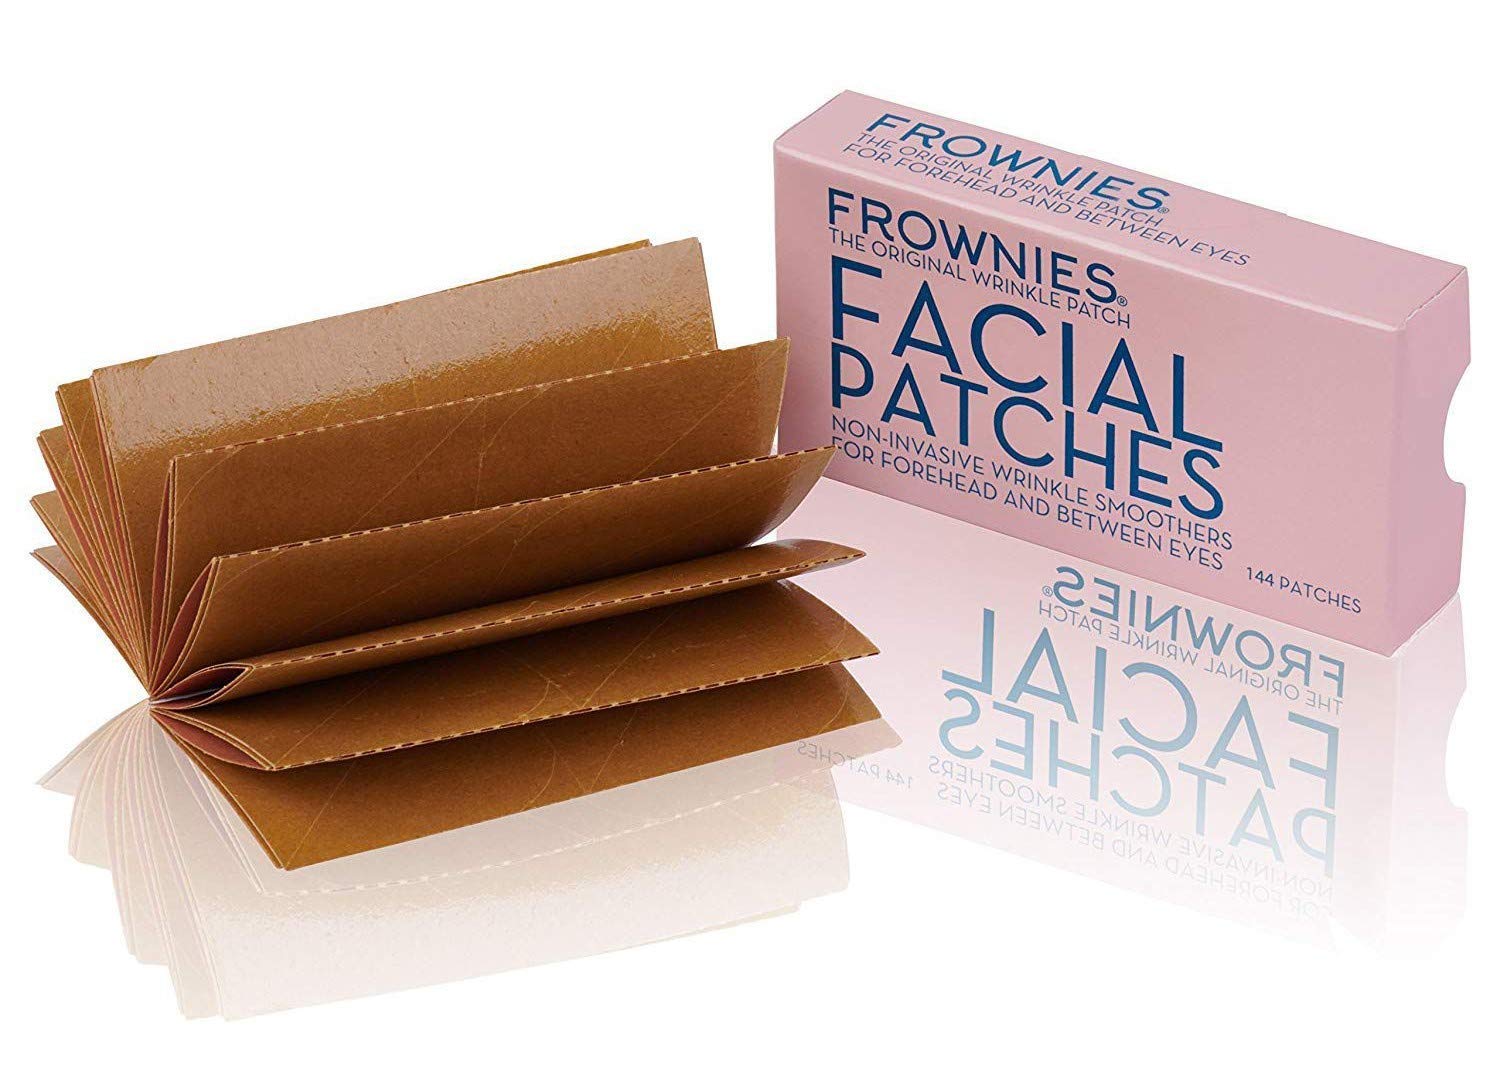 Frownies Facial Patches Box